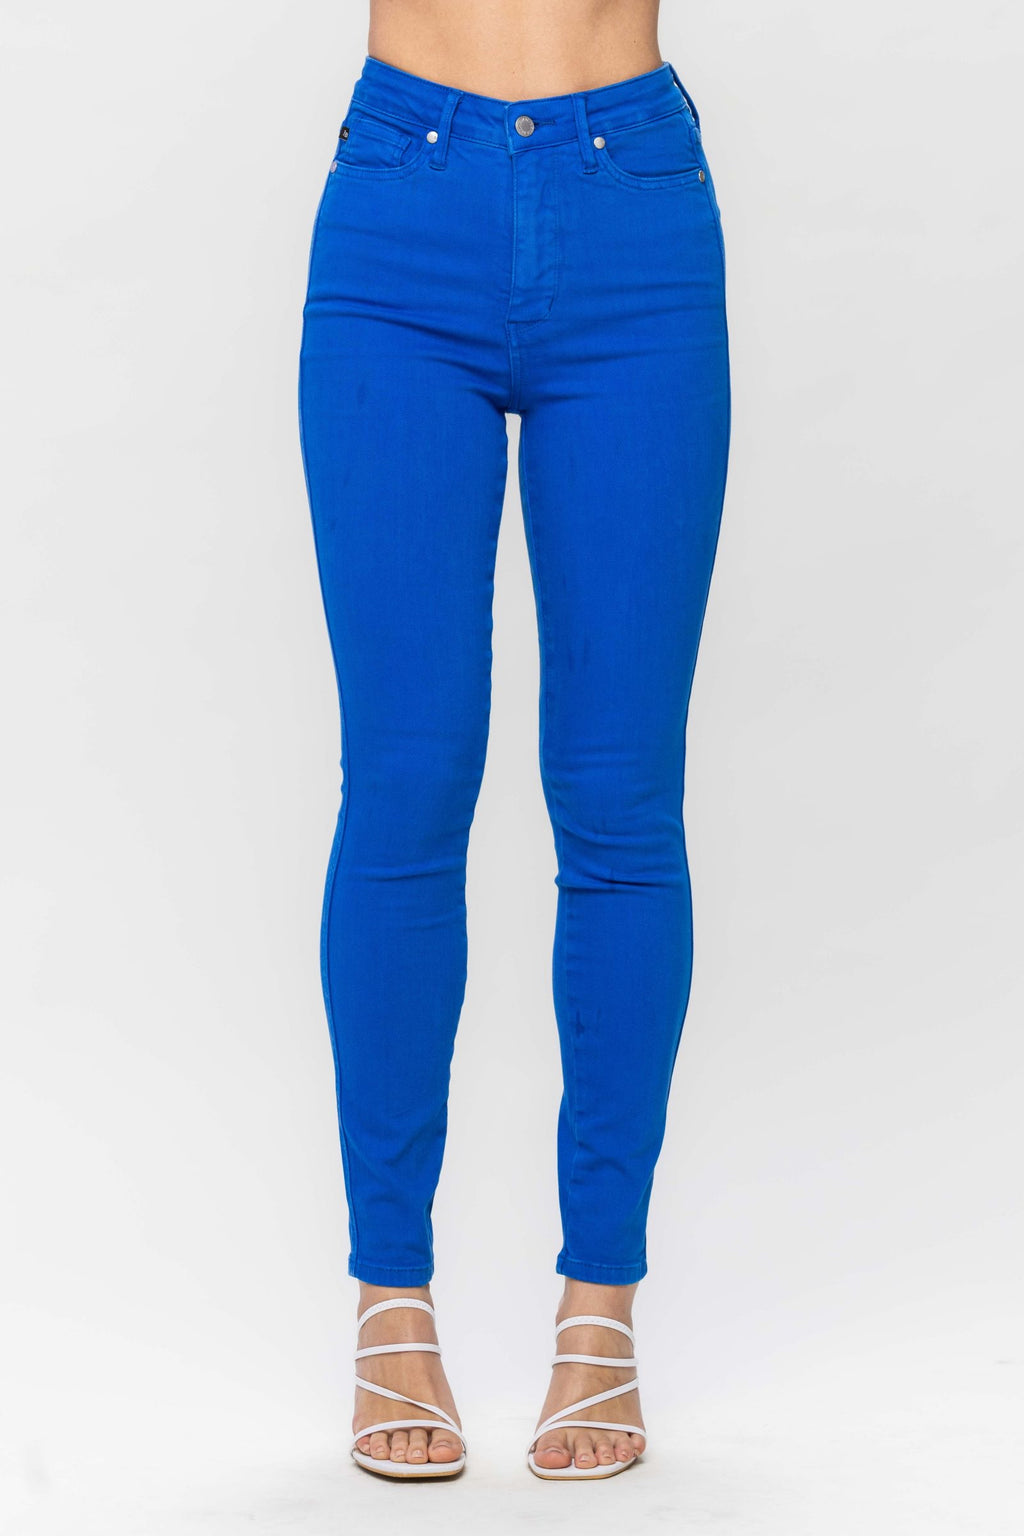 JUDY BLUE HIGH WAIST TUMMY CONTROL JEANS DYED SKINNY IN COBALT BLUE - Lil Monkey Boutique